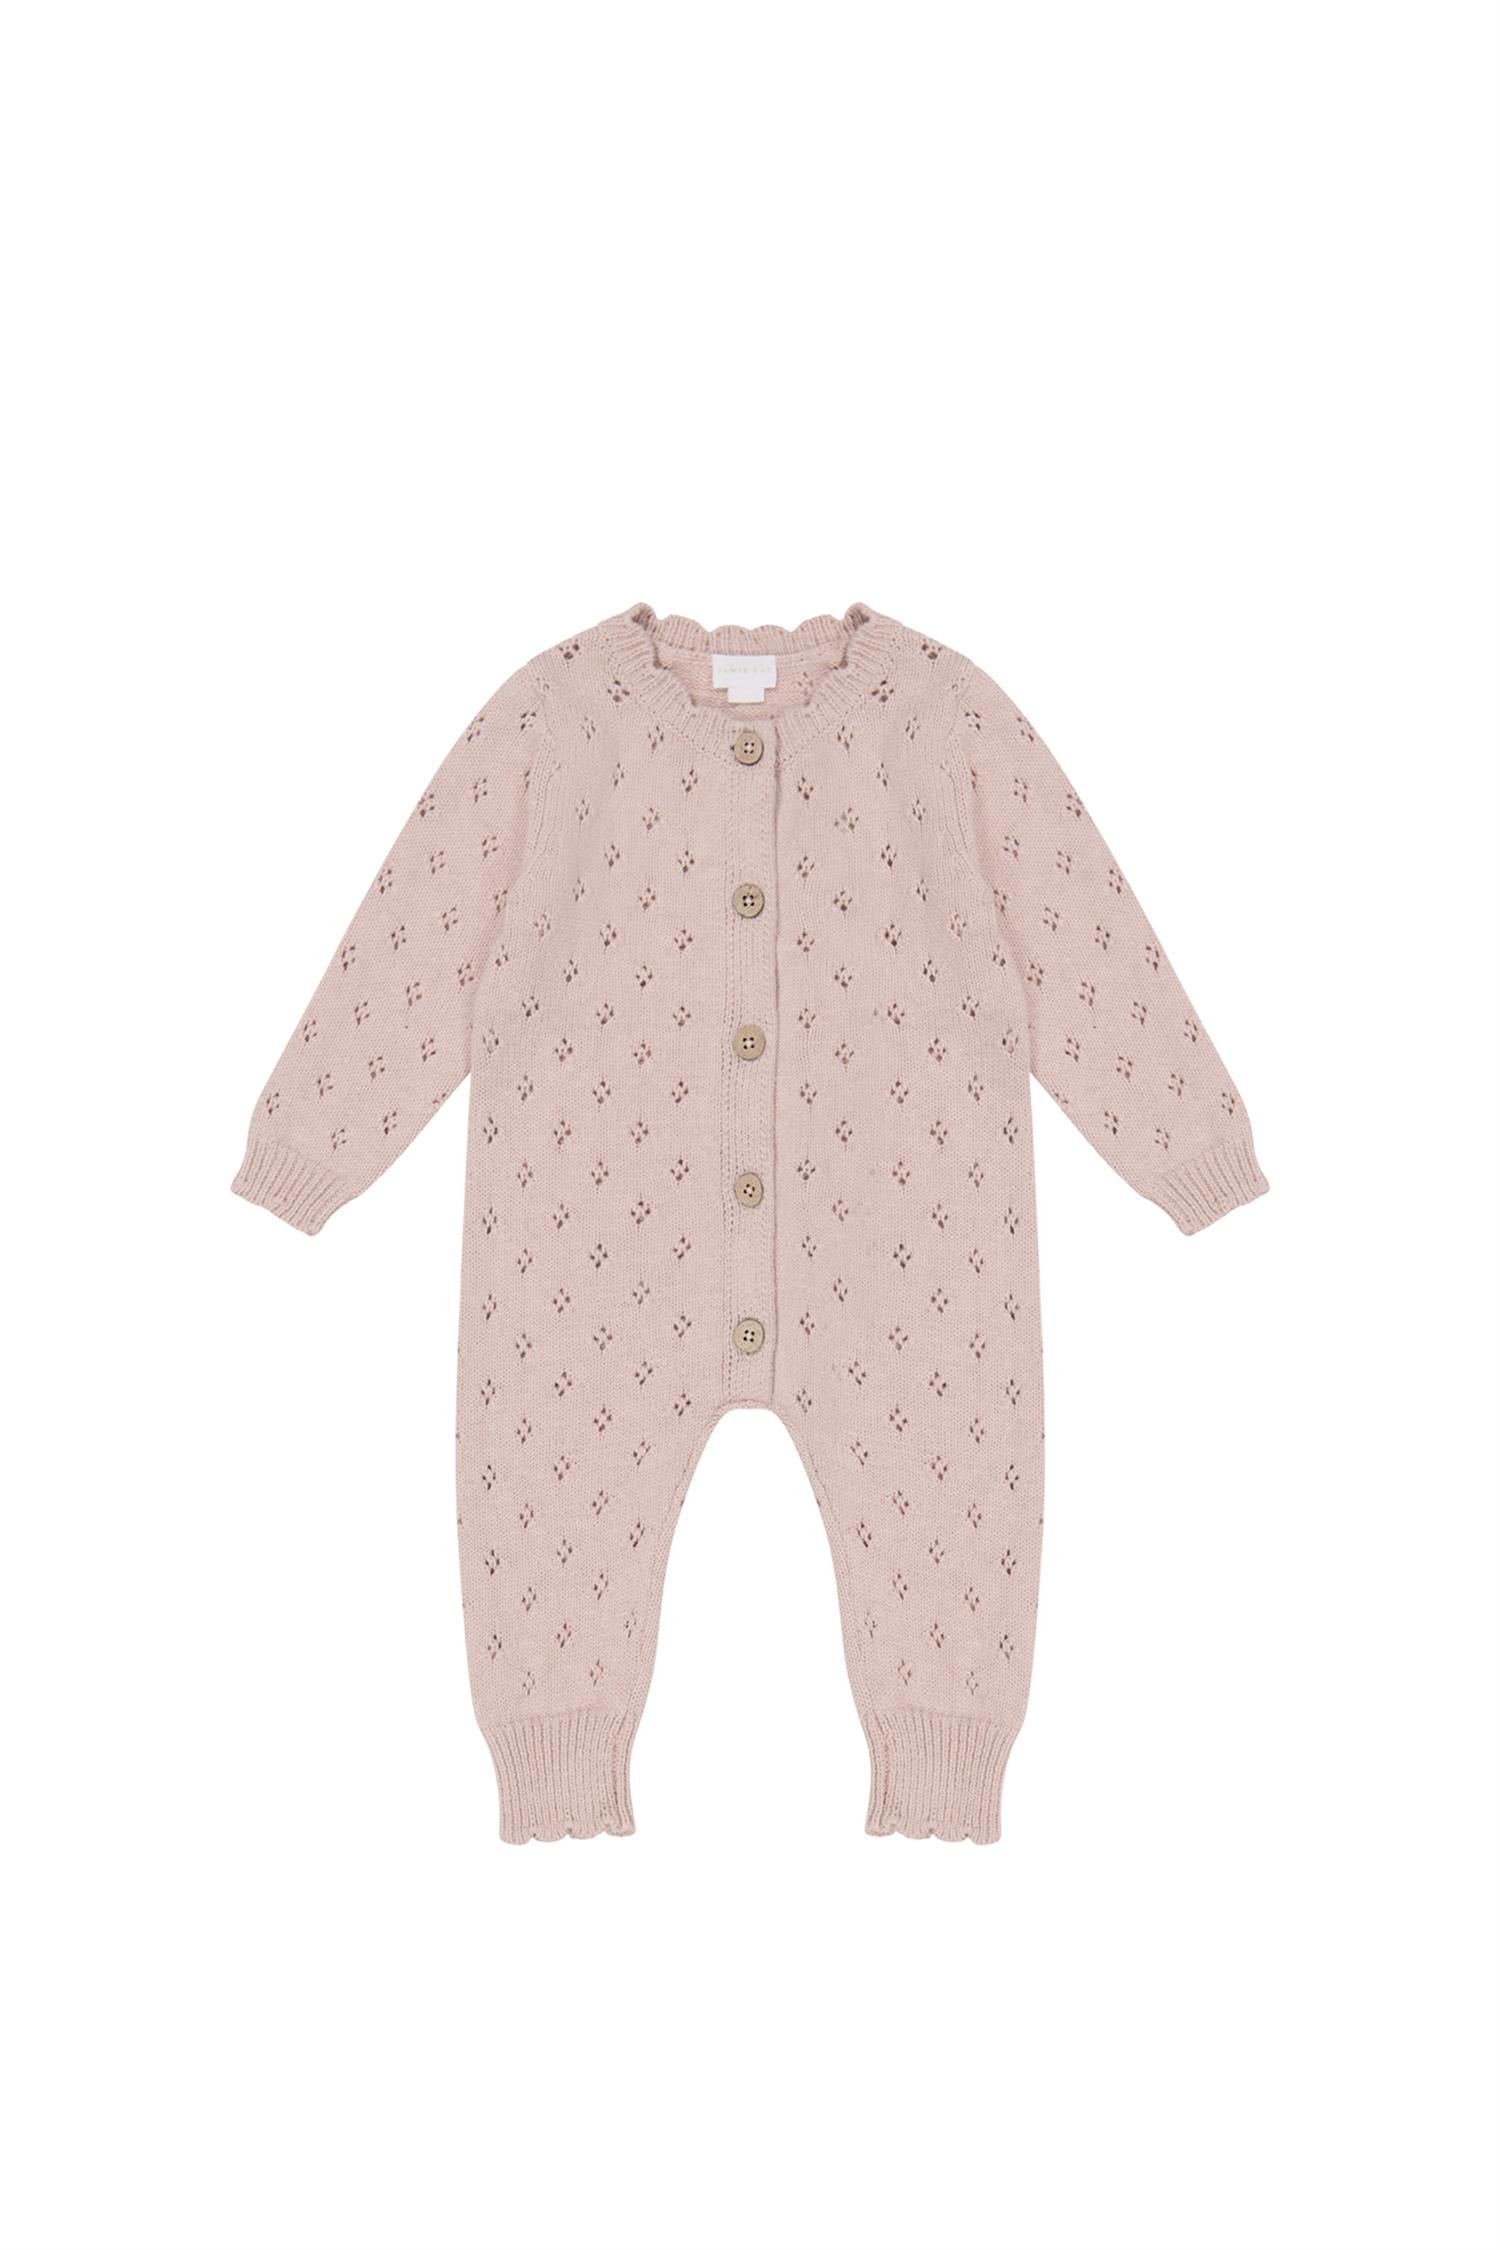 JAMIE KAY Emily Knitted Onepiece Gammelrosa